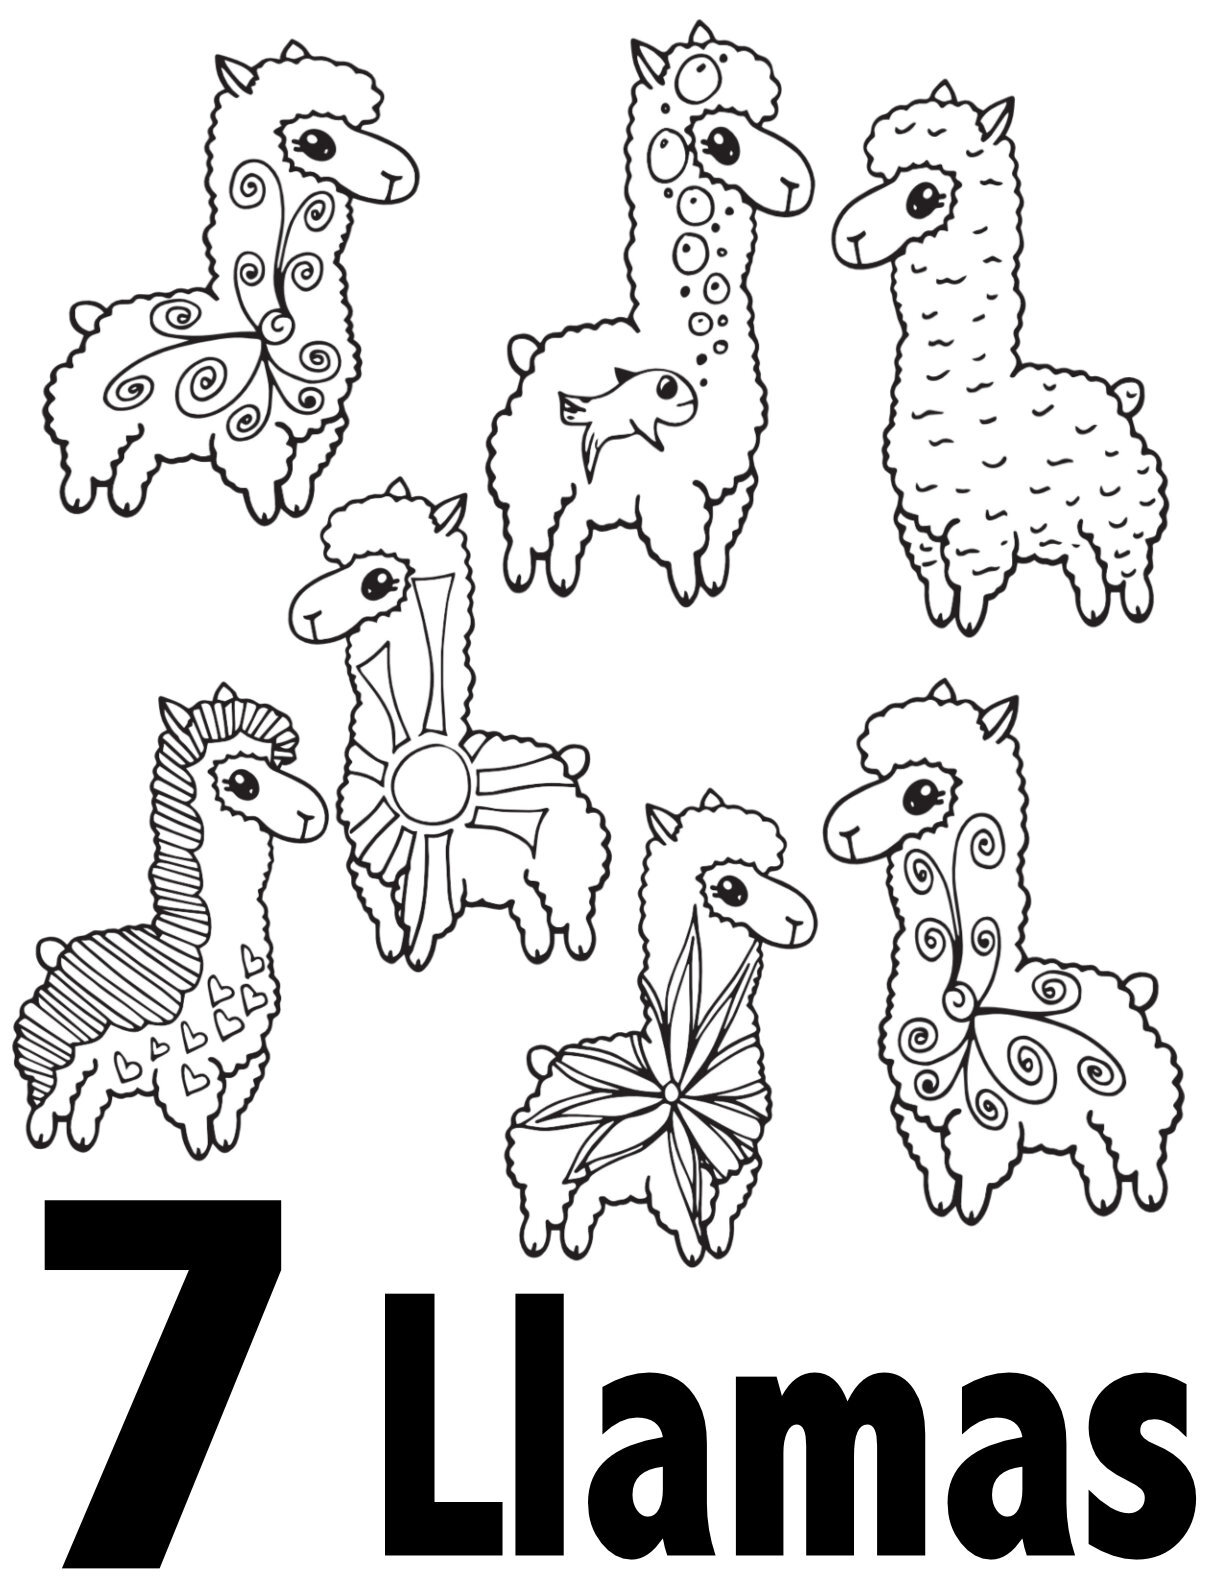 Llama Number Coloring Pages Collection 1-10 - Free Preschool/Kindergarten Printable - Number 7CLICK TO DOWNLOAD THE 7 LLAMA PAGE ONLY